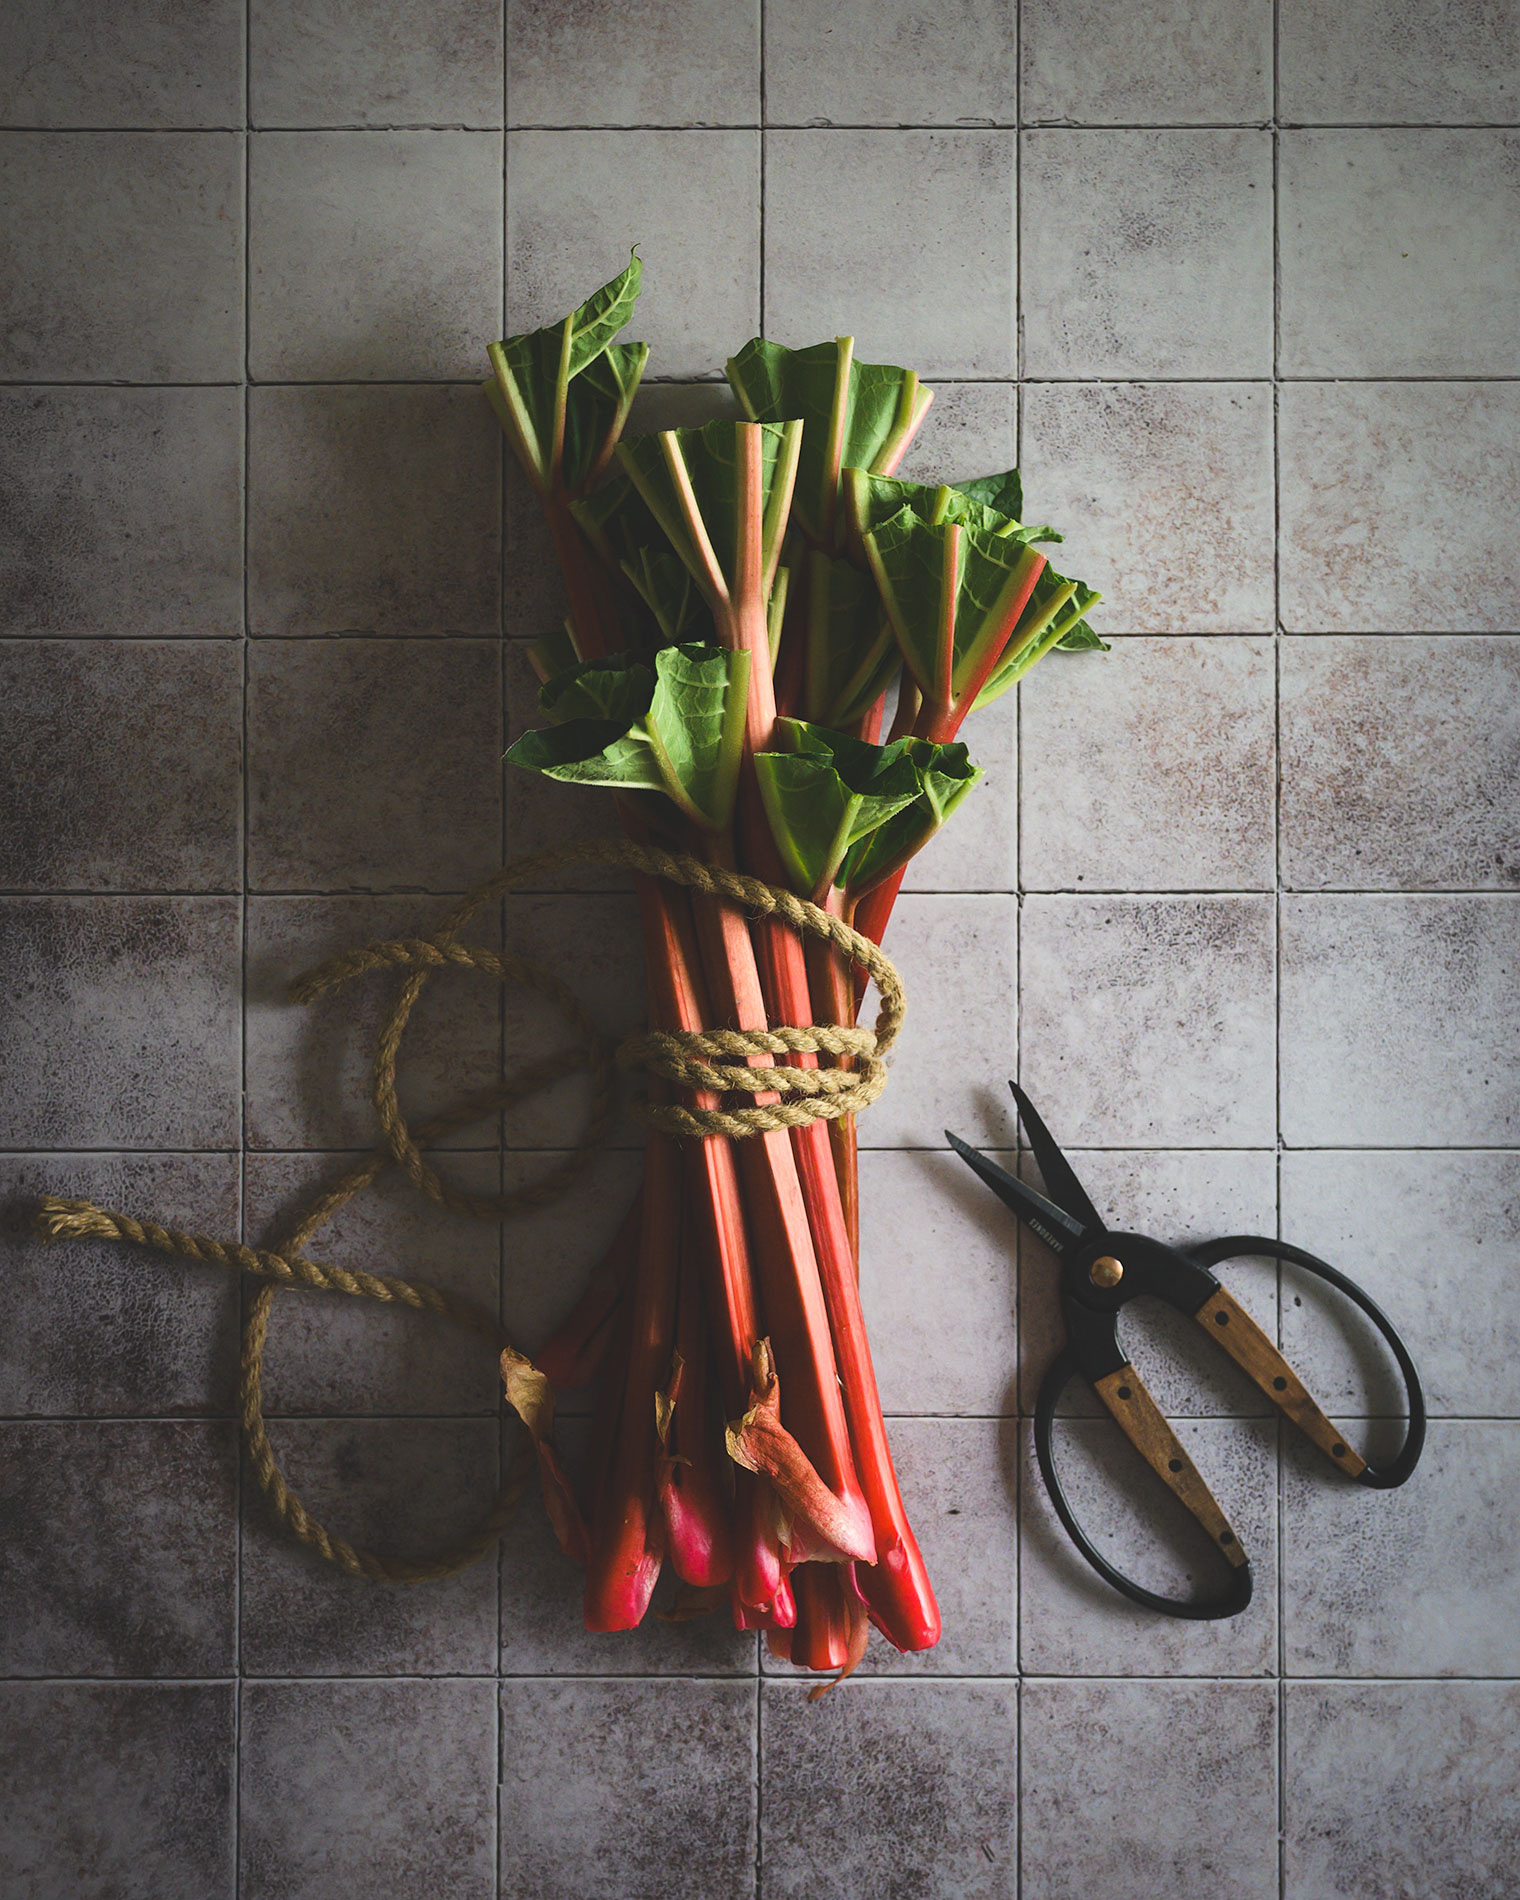 Capturing the Beauty of Rhubarb in Photography